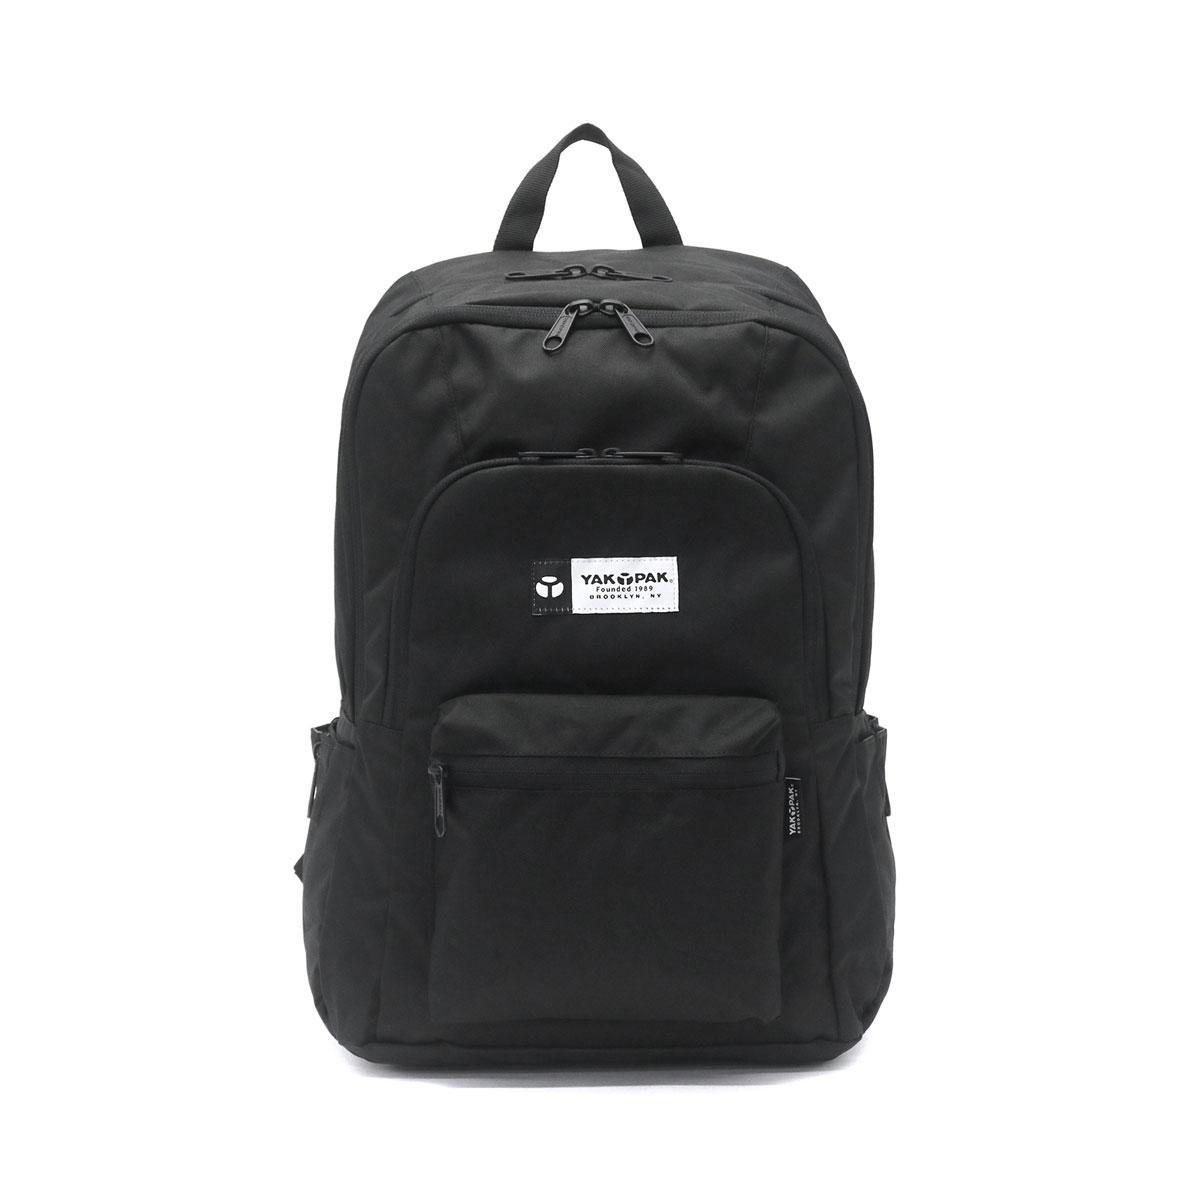 YAKPAK ヤックパック FORCE BACKPACK バックパック 25L 8125321 0125310